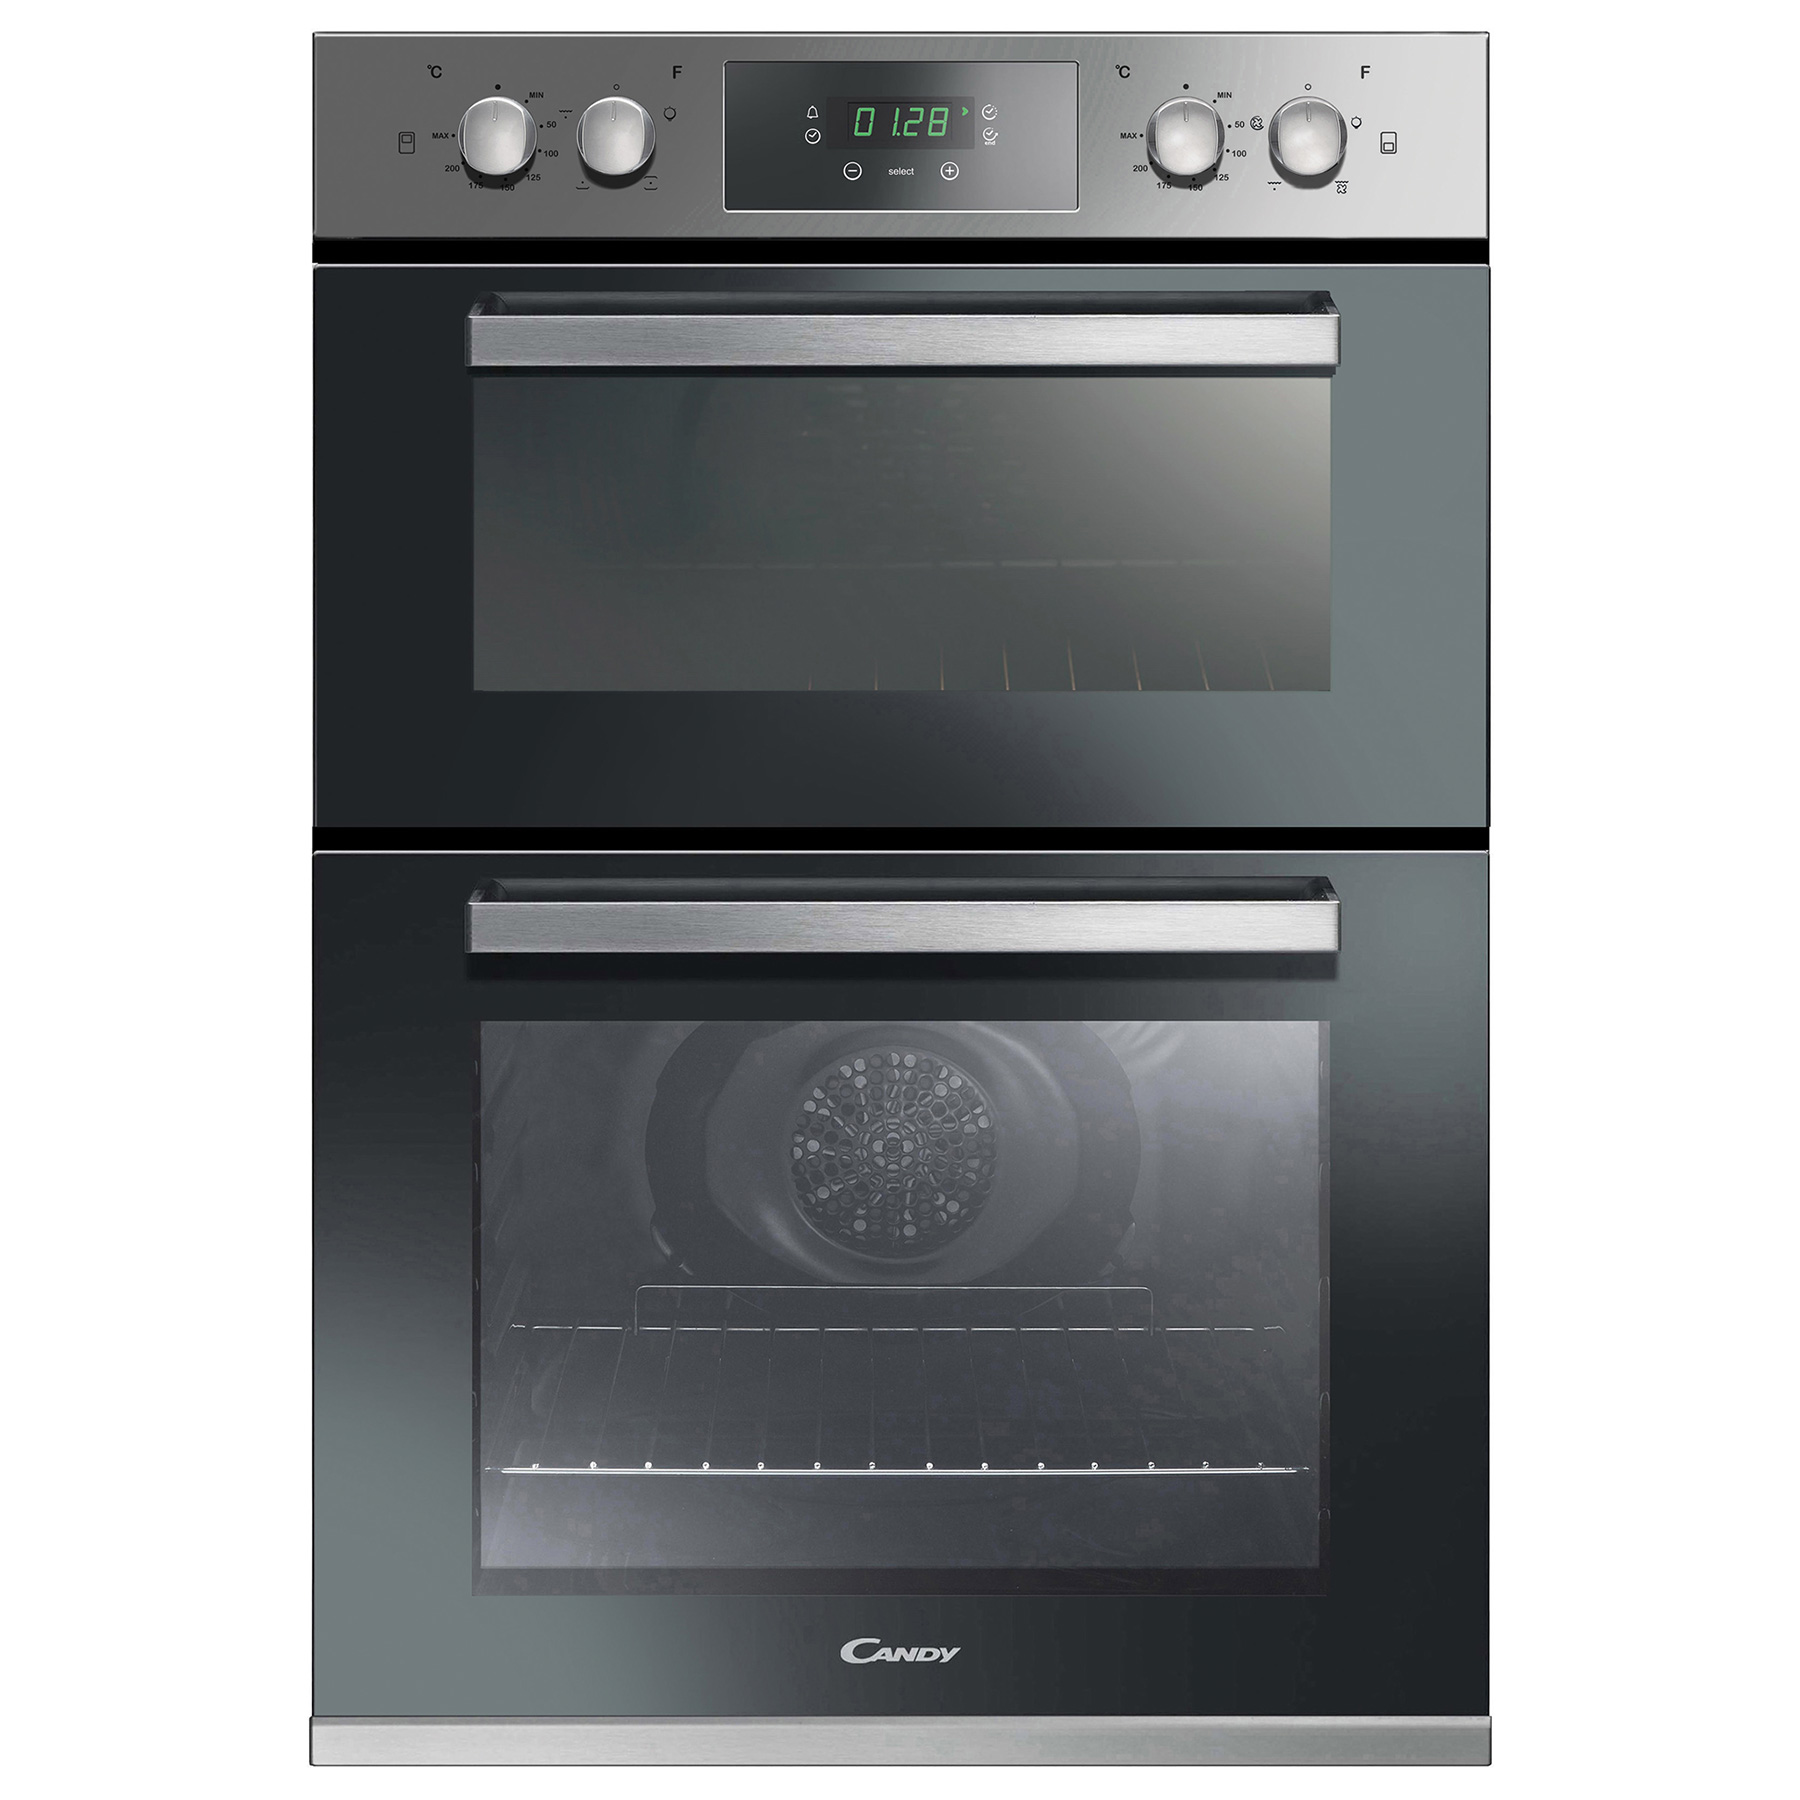 Candy FC9D405IN Built In Electric Double Oven in St Steel 65L A A Rate